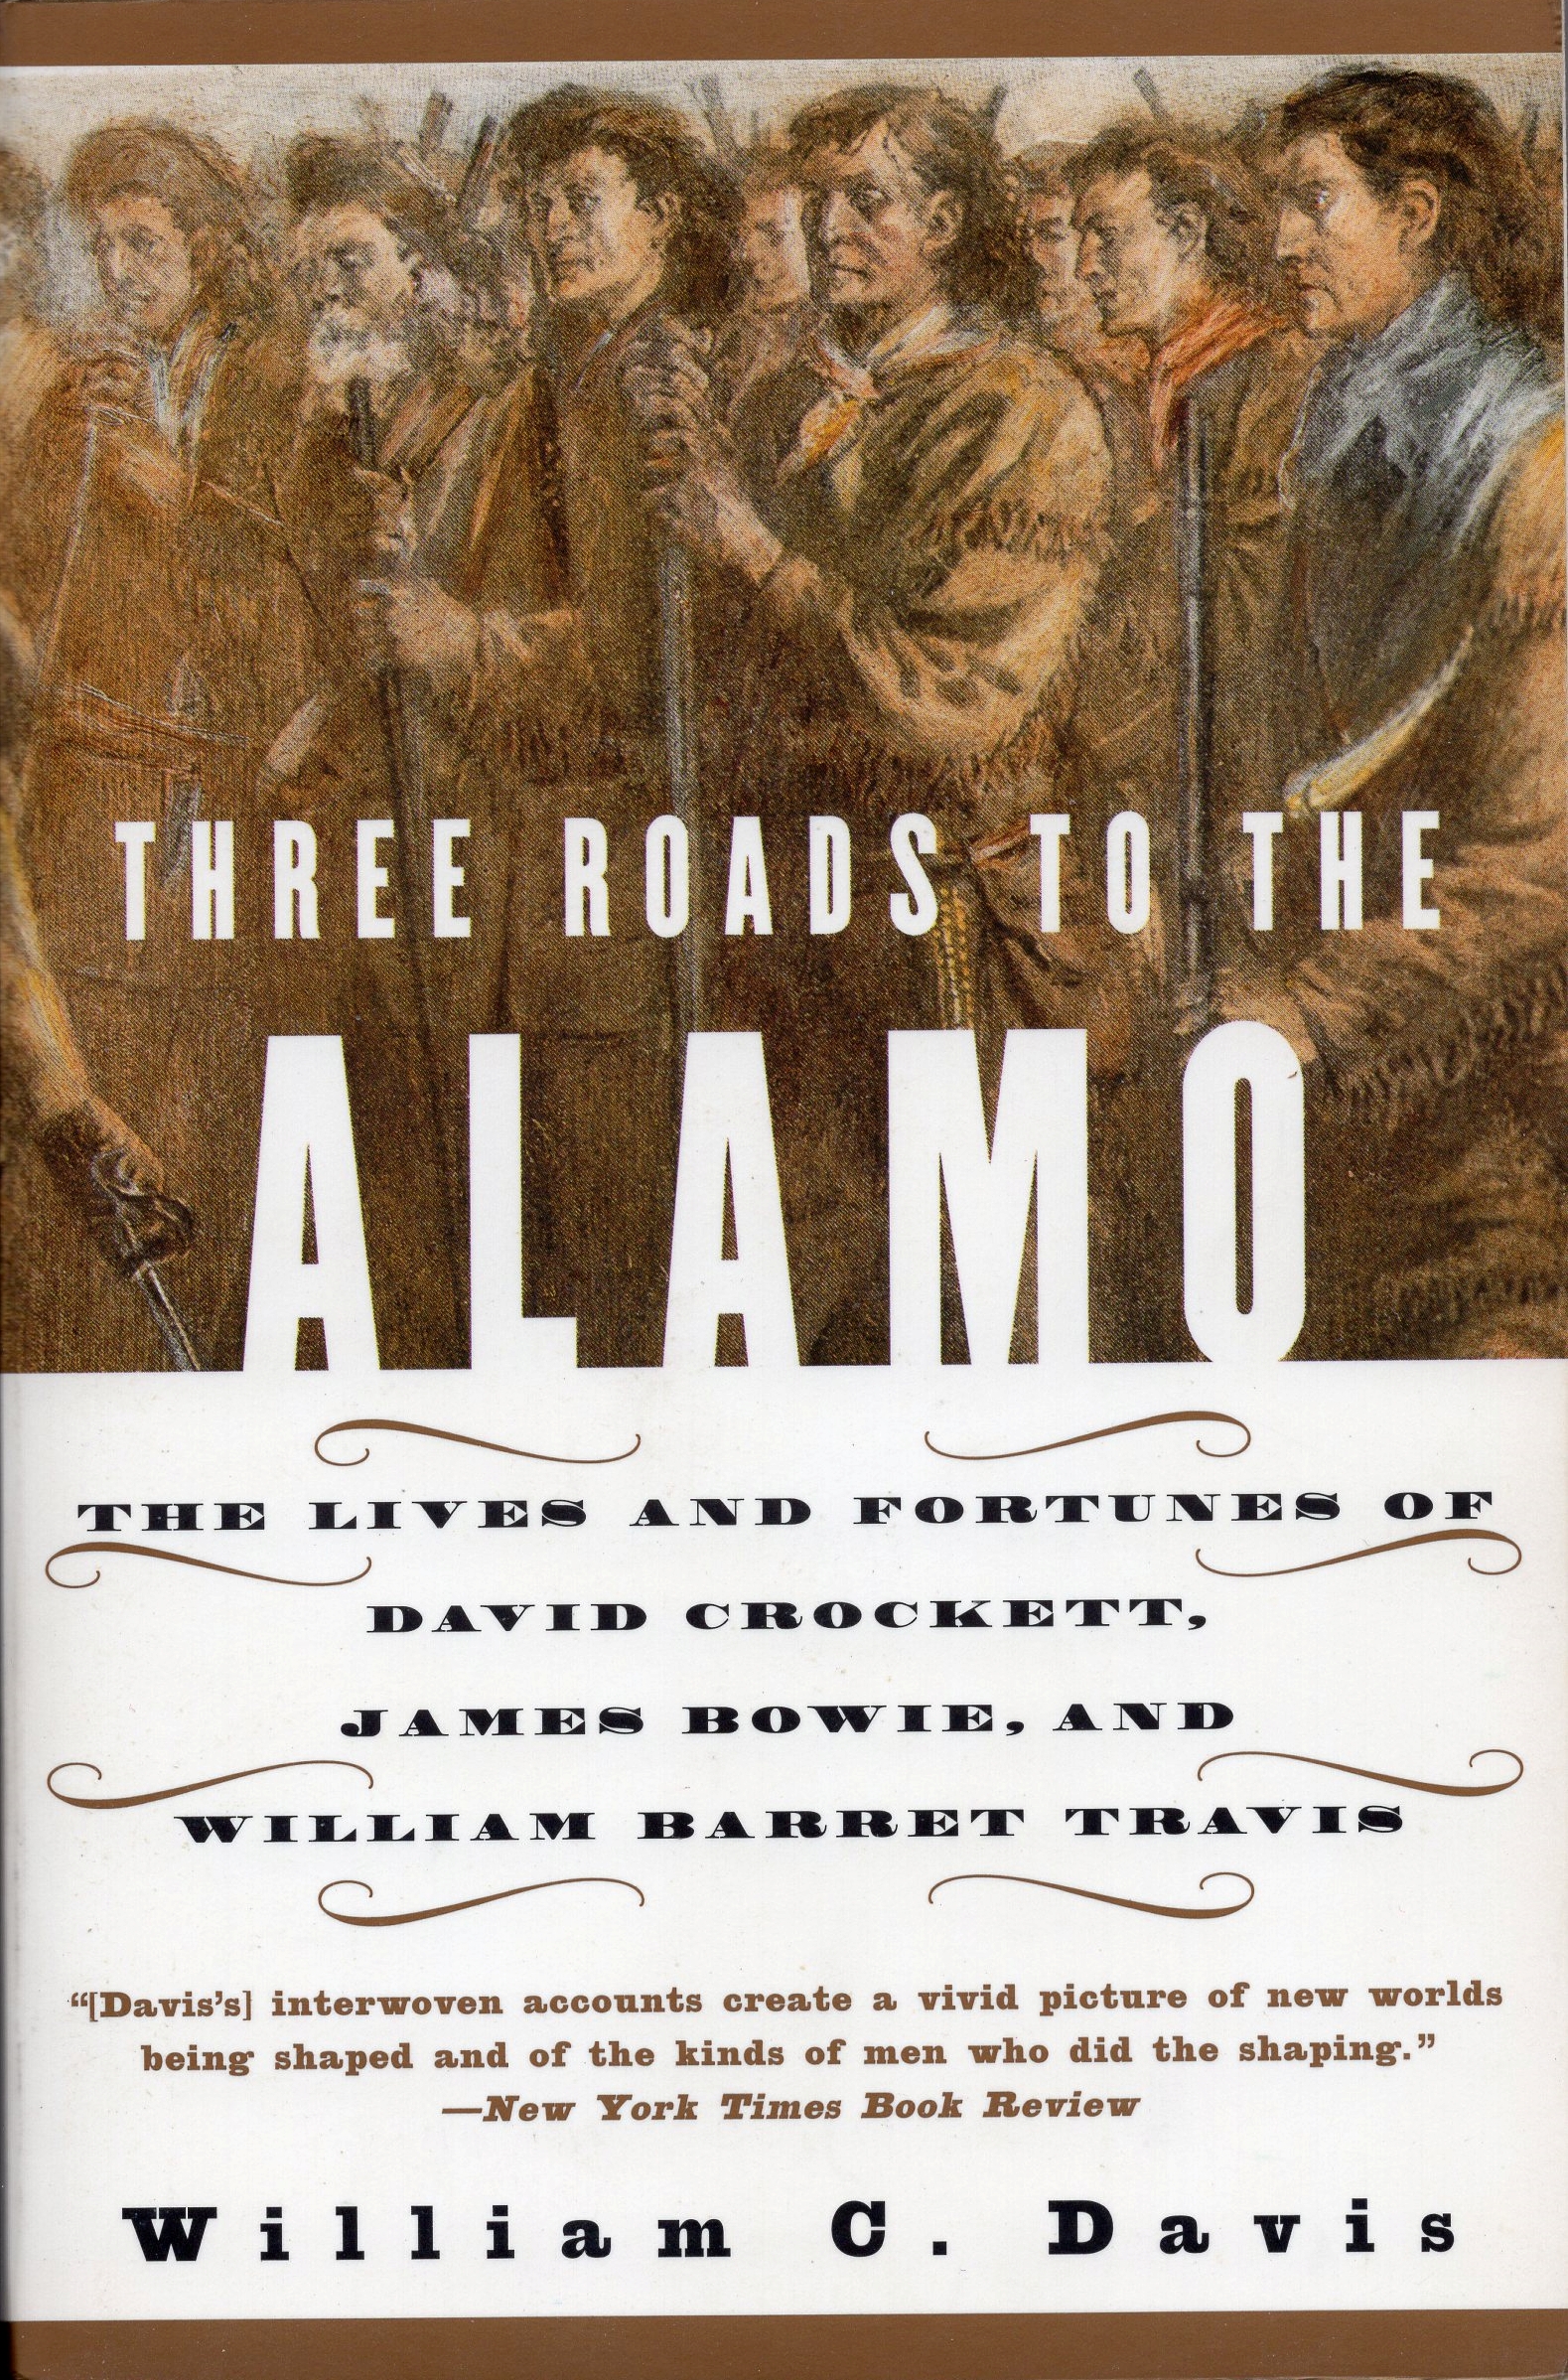 Three Roads to the Alamo: The Lives and Fortunes of David Crockett, James Bowie, and William Barret Travis by William C. Davis (1998)